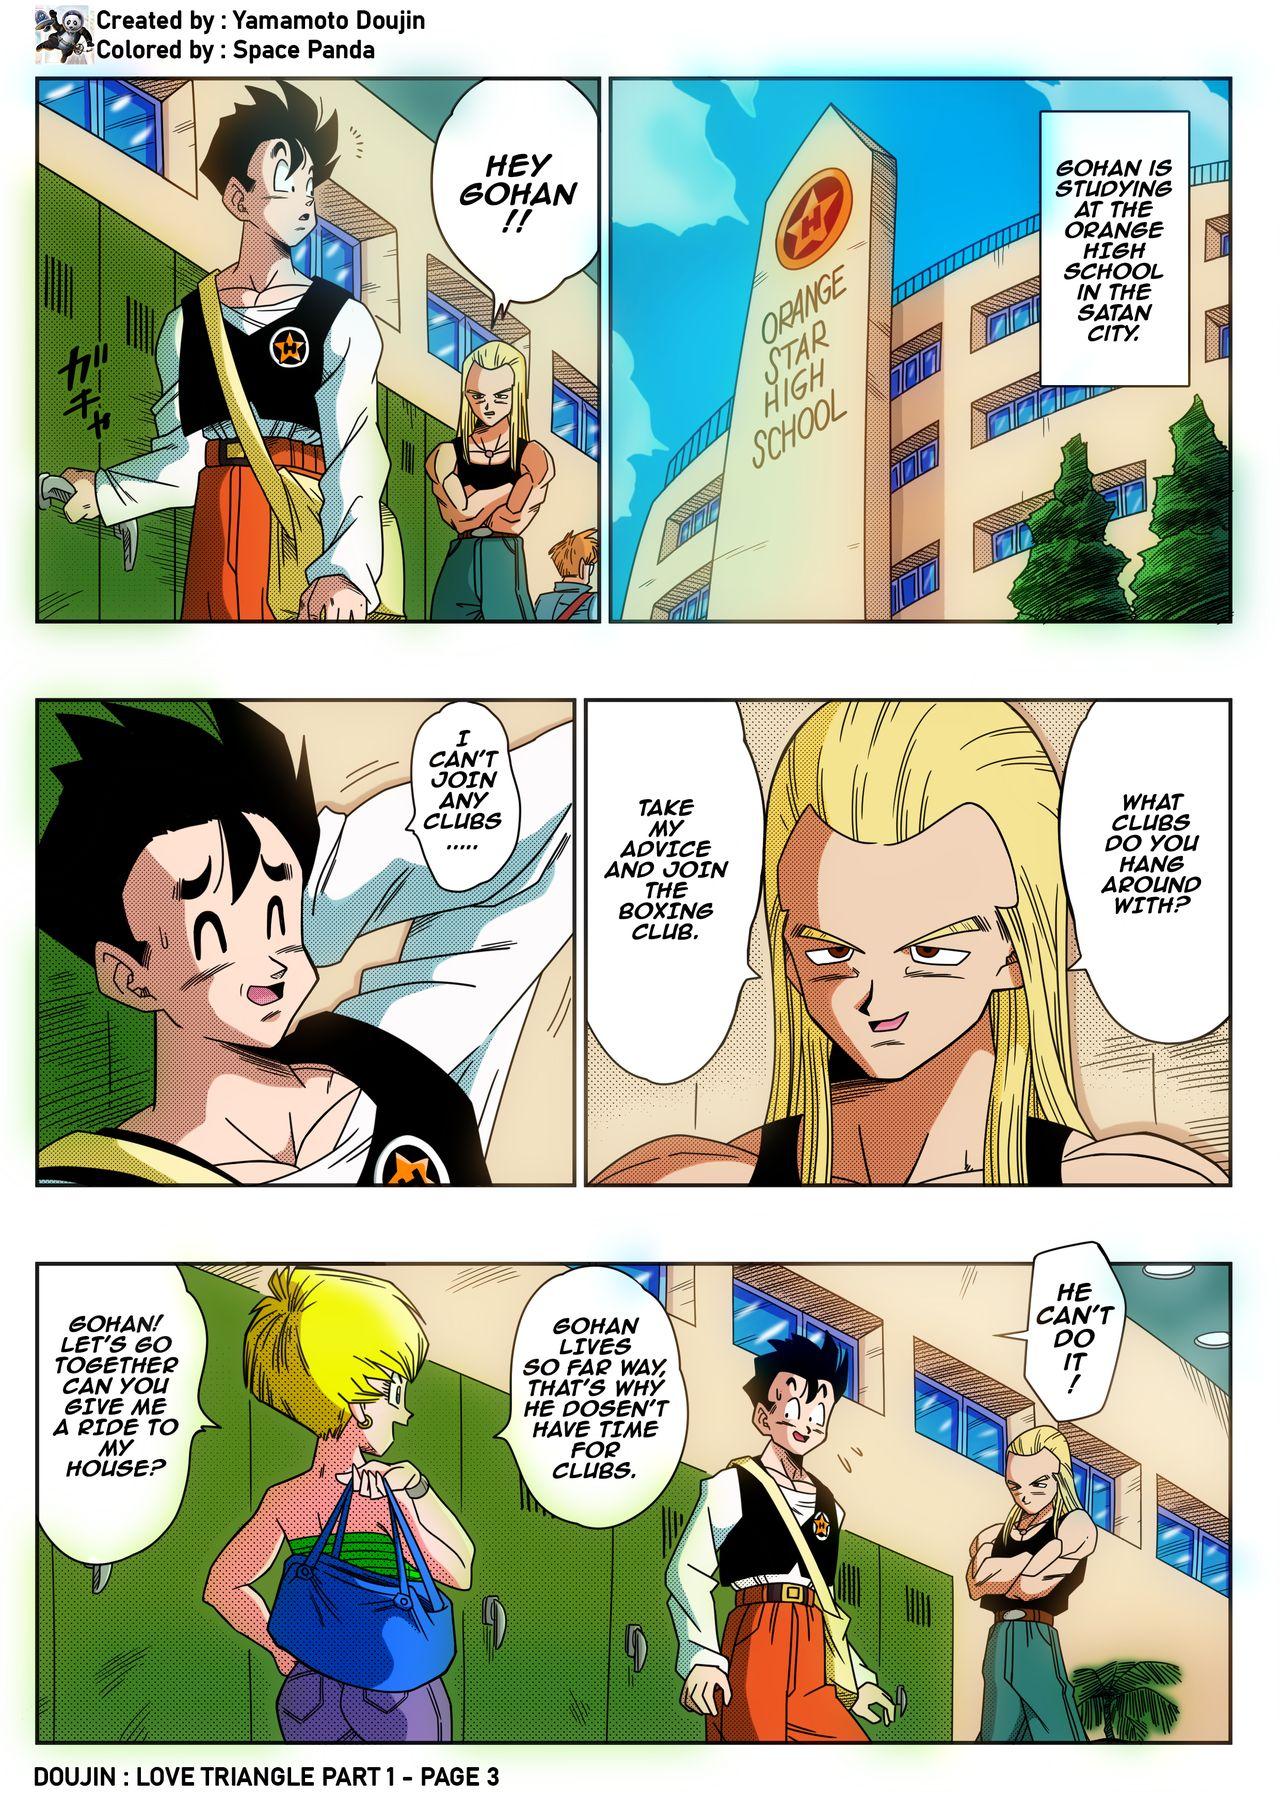 Babe Love Triangle - Part 1 - Dragon ball z Pawg - Picture 3